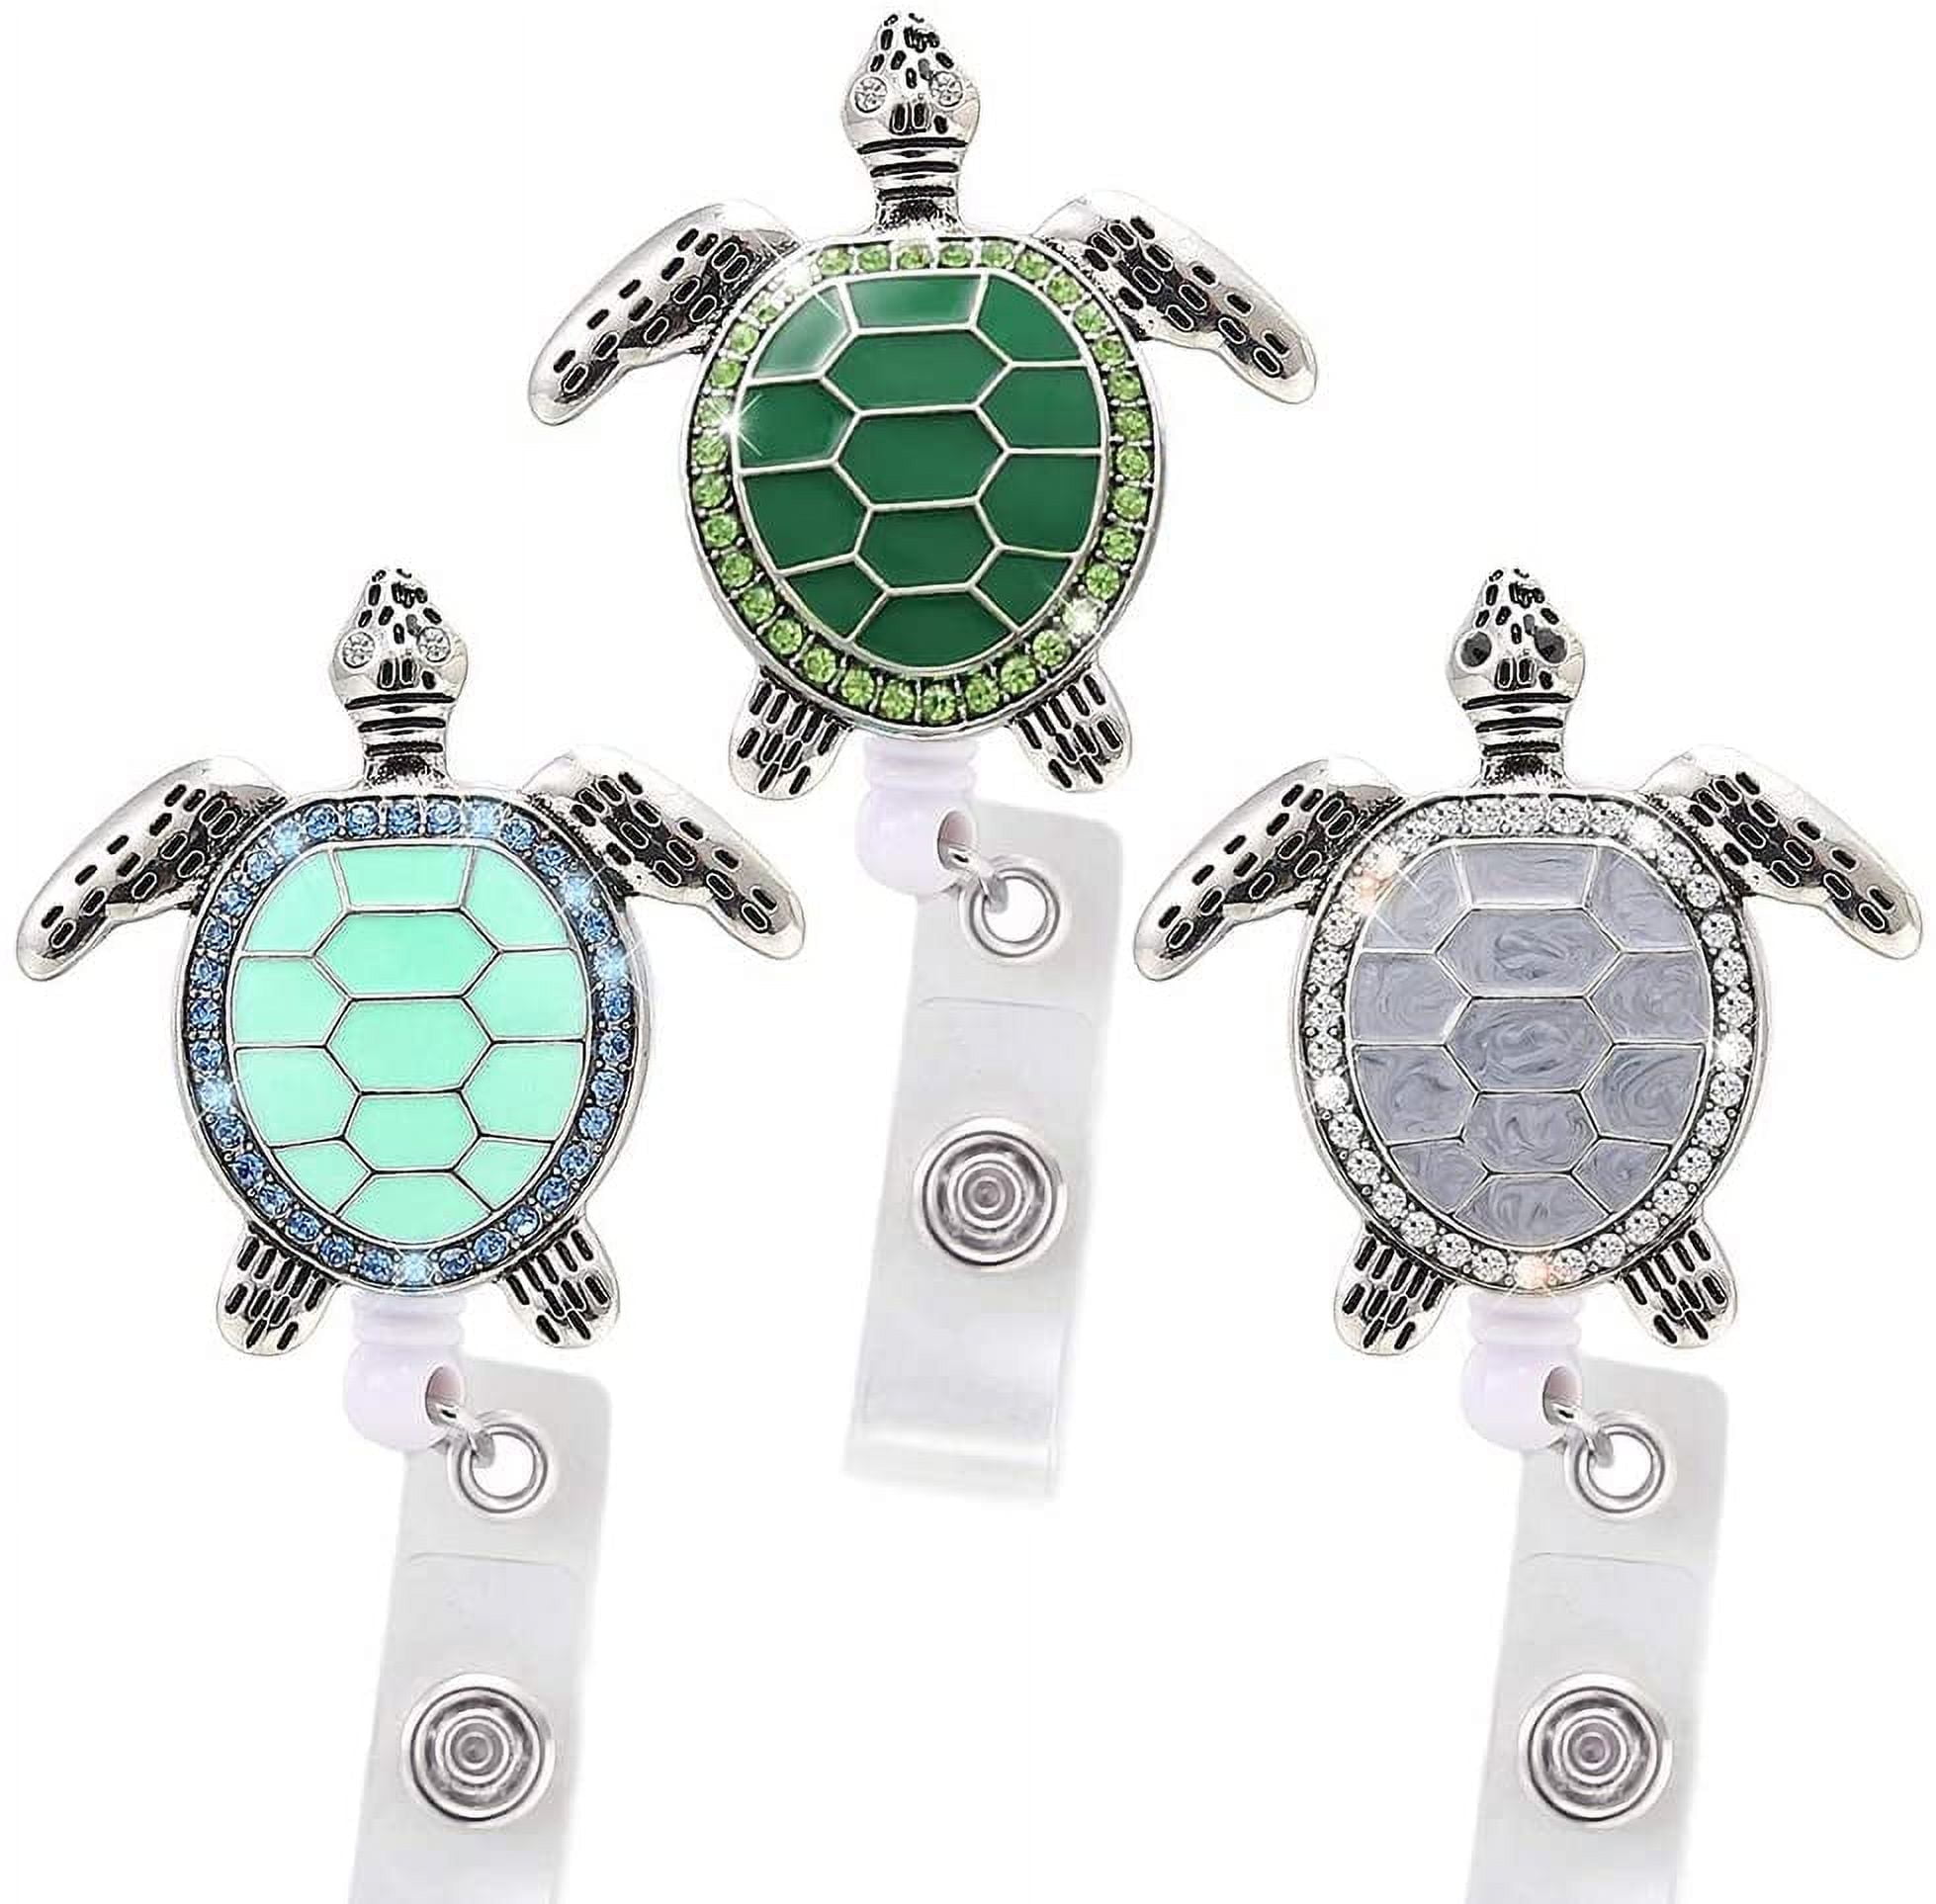 3PCS Sea Turtle Badge Reel - Retractable Badge Holder with Alligator Clip -  Nurse Cute Badge Clip for ID Card Holders, 24Wire Cord (Turtle) 